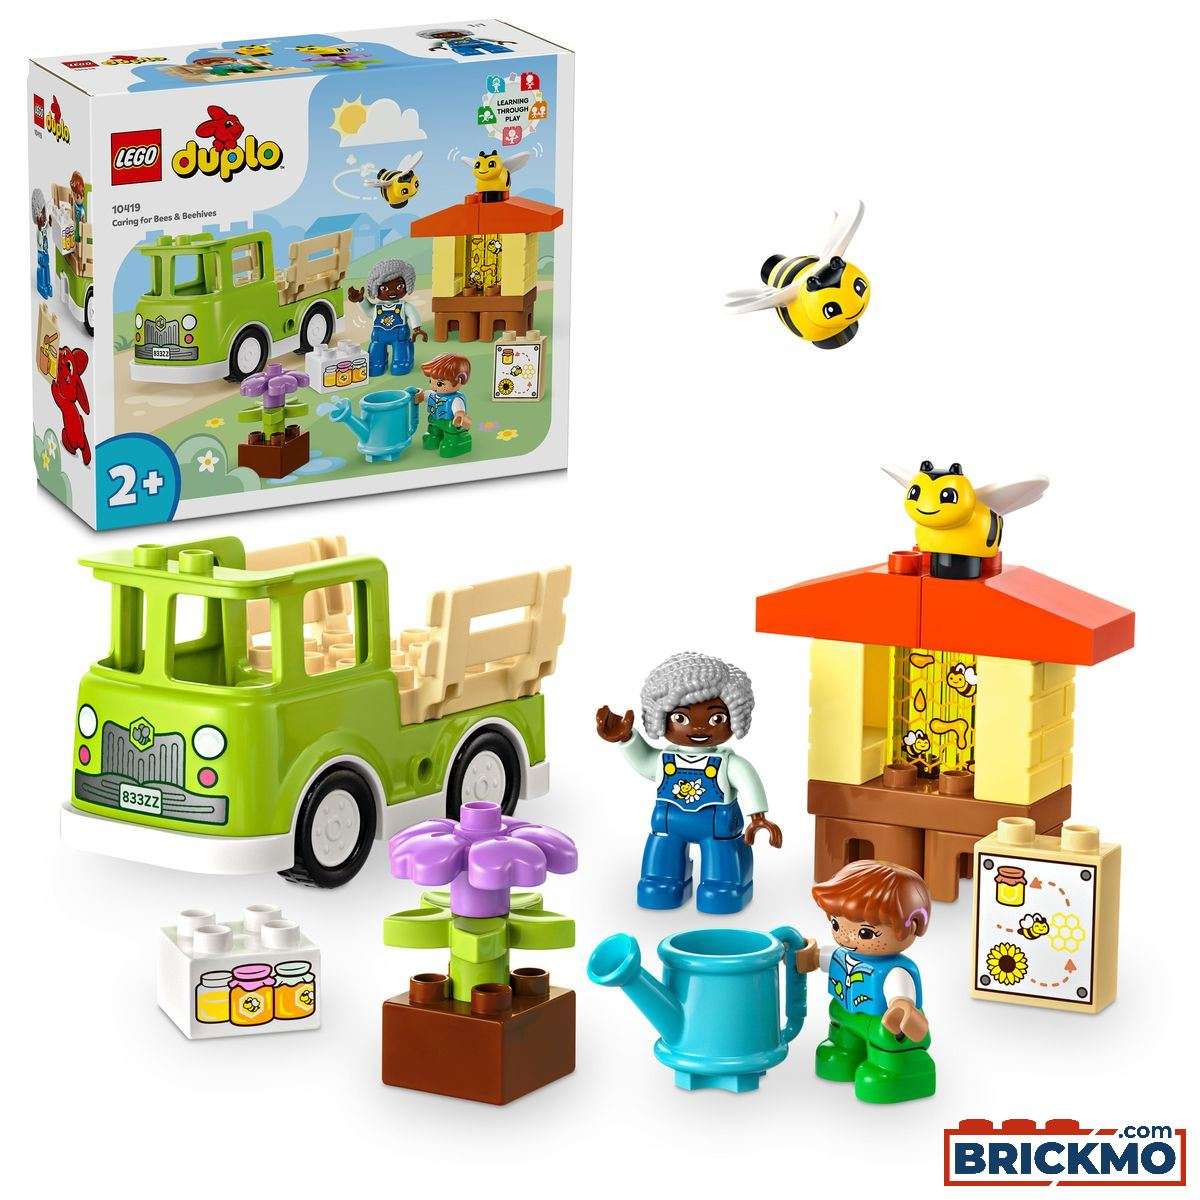 LEGO Duplo 10419 Caring for Bees &amp; Beehives 10419